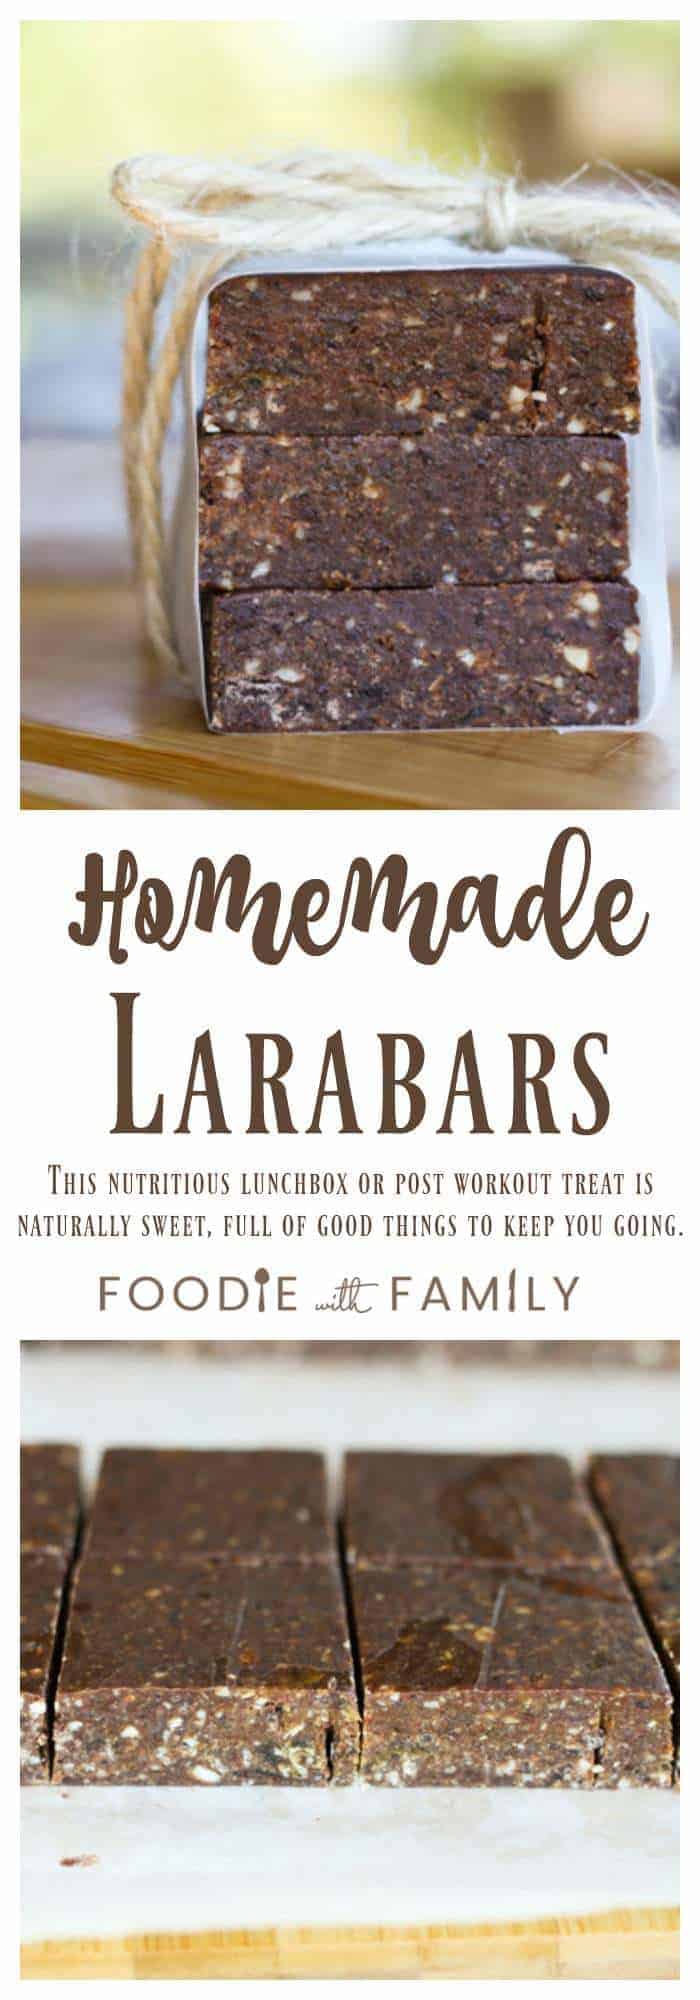 Homemade Larabars: This super nutritious, delicious lunchbox or post workout snack tastes more like candy bars than health food! 